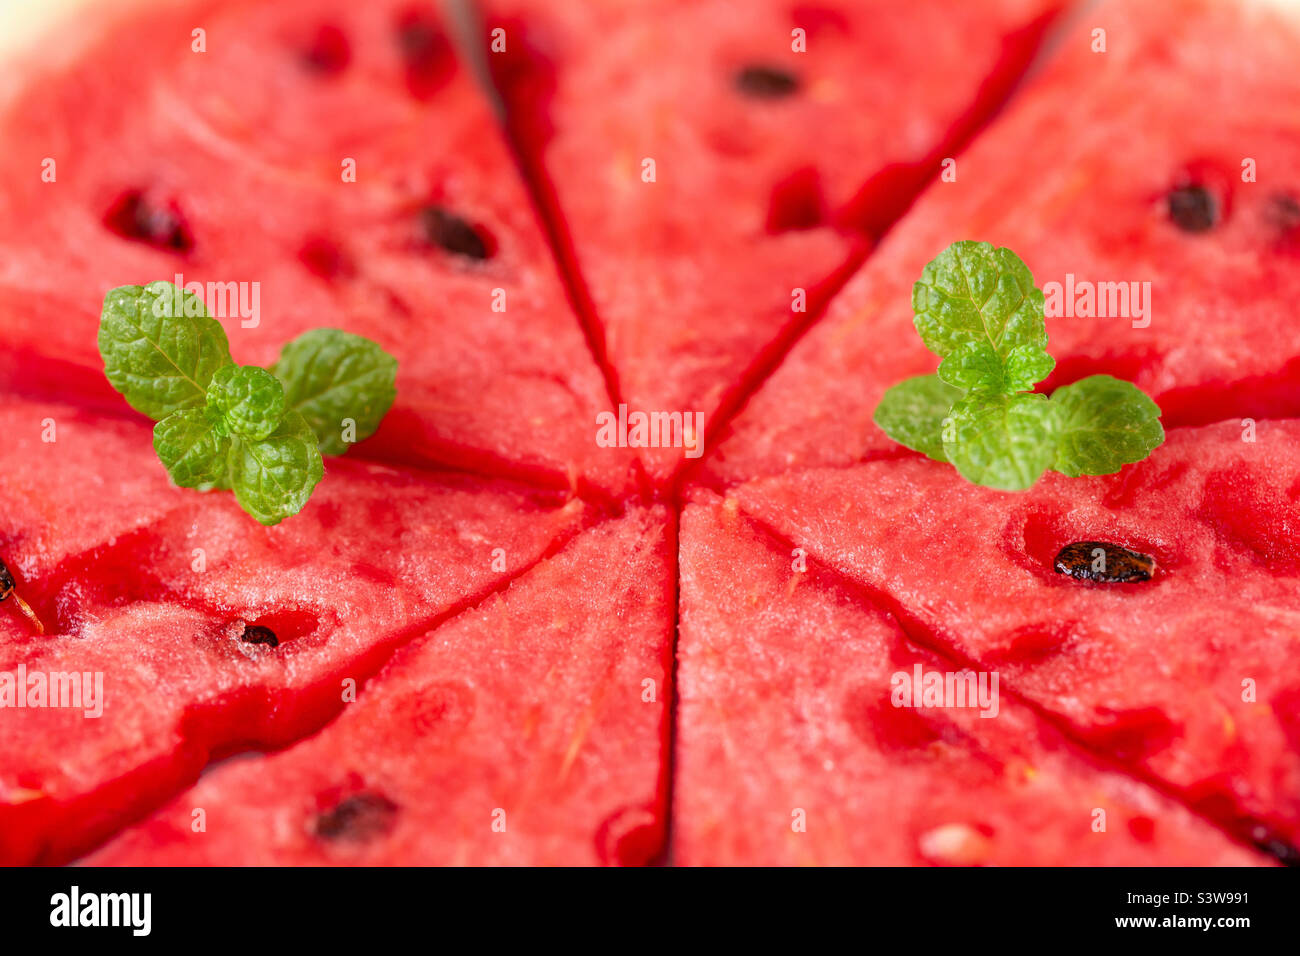 Macro shot of sweet juicy watermelon slices with fresh mint leaves, delicious healthy summer snack Stock Photo